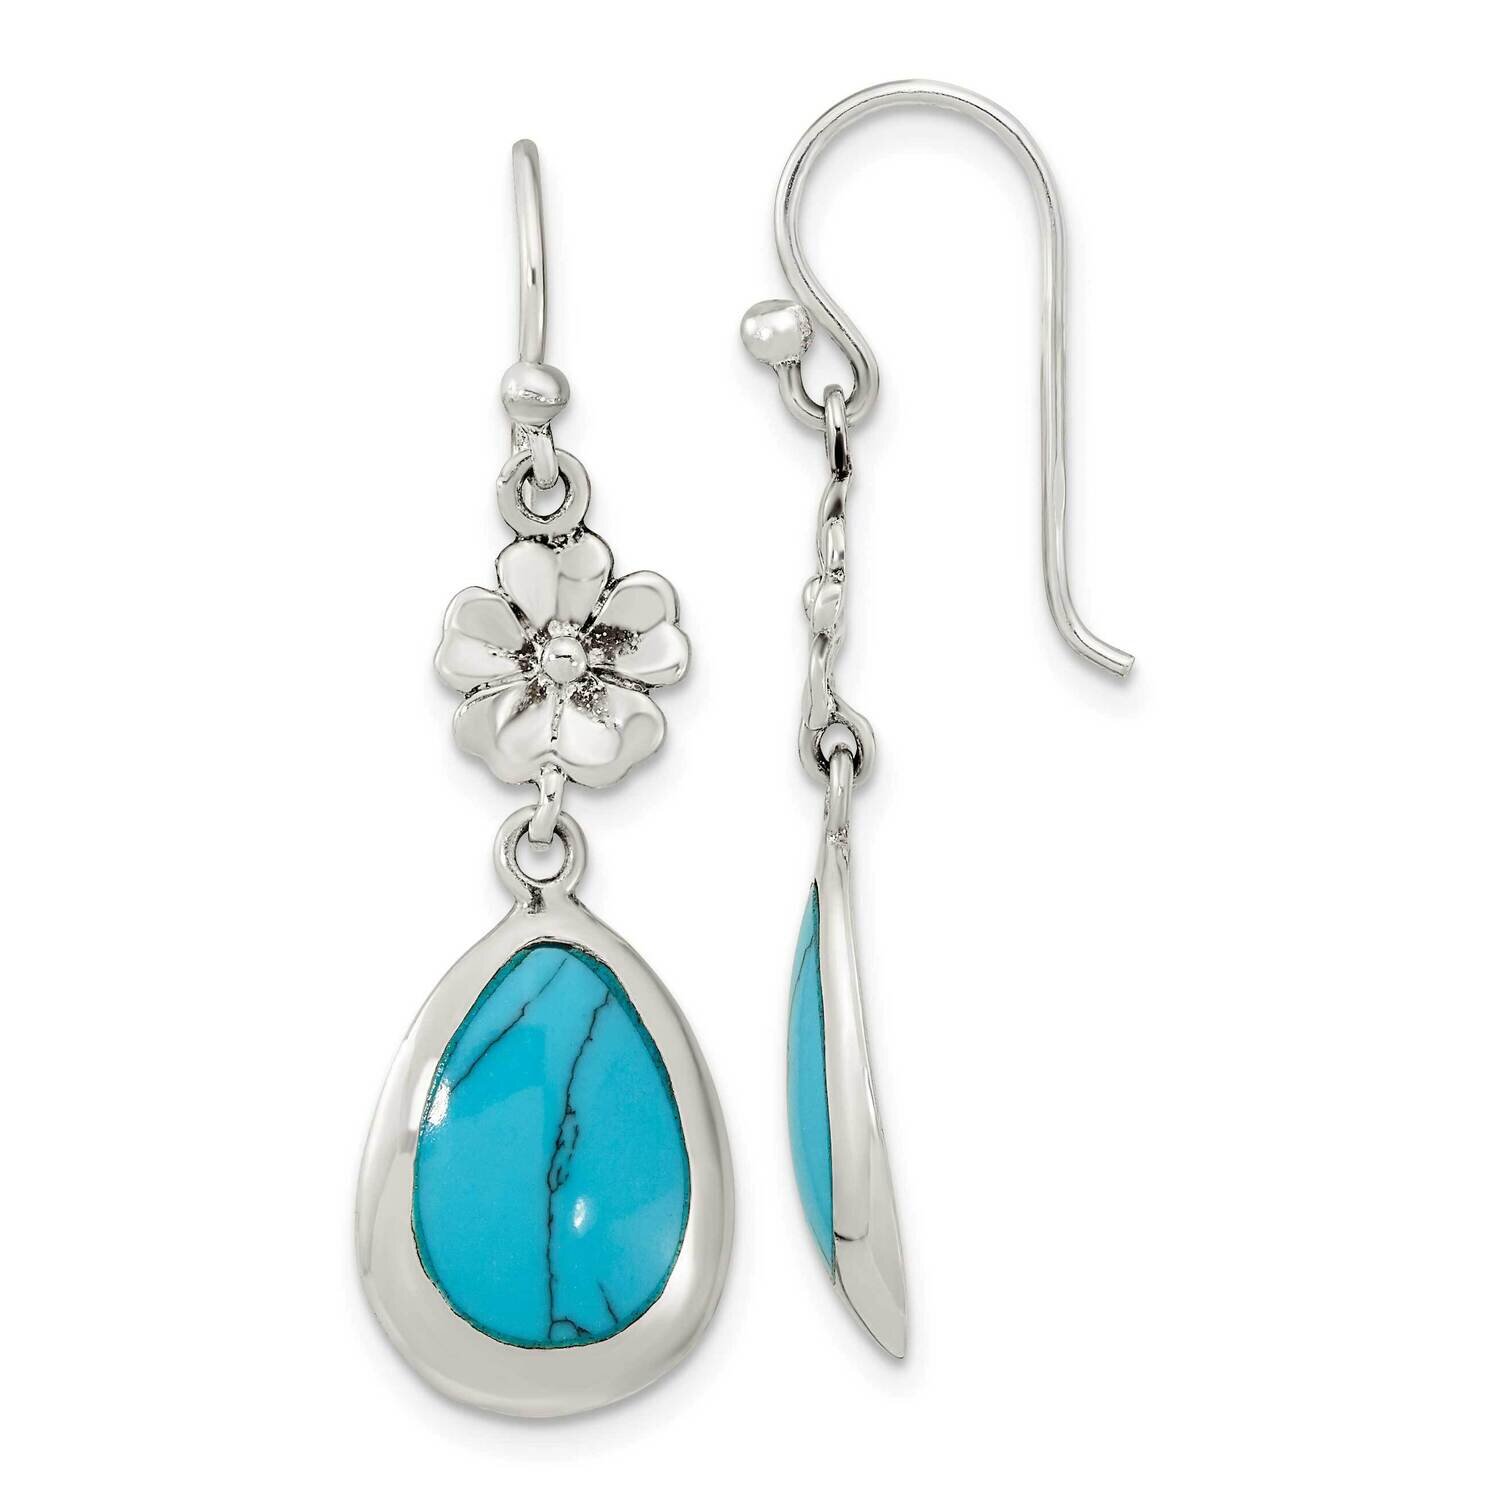 Polish Floral Reconstituted Turquoise Teardrop Earrings Sterling Silver QE16393